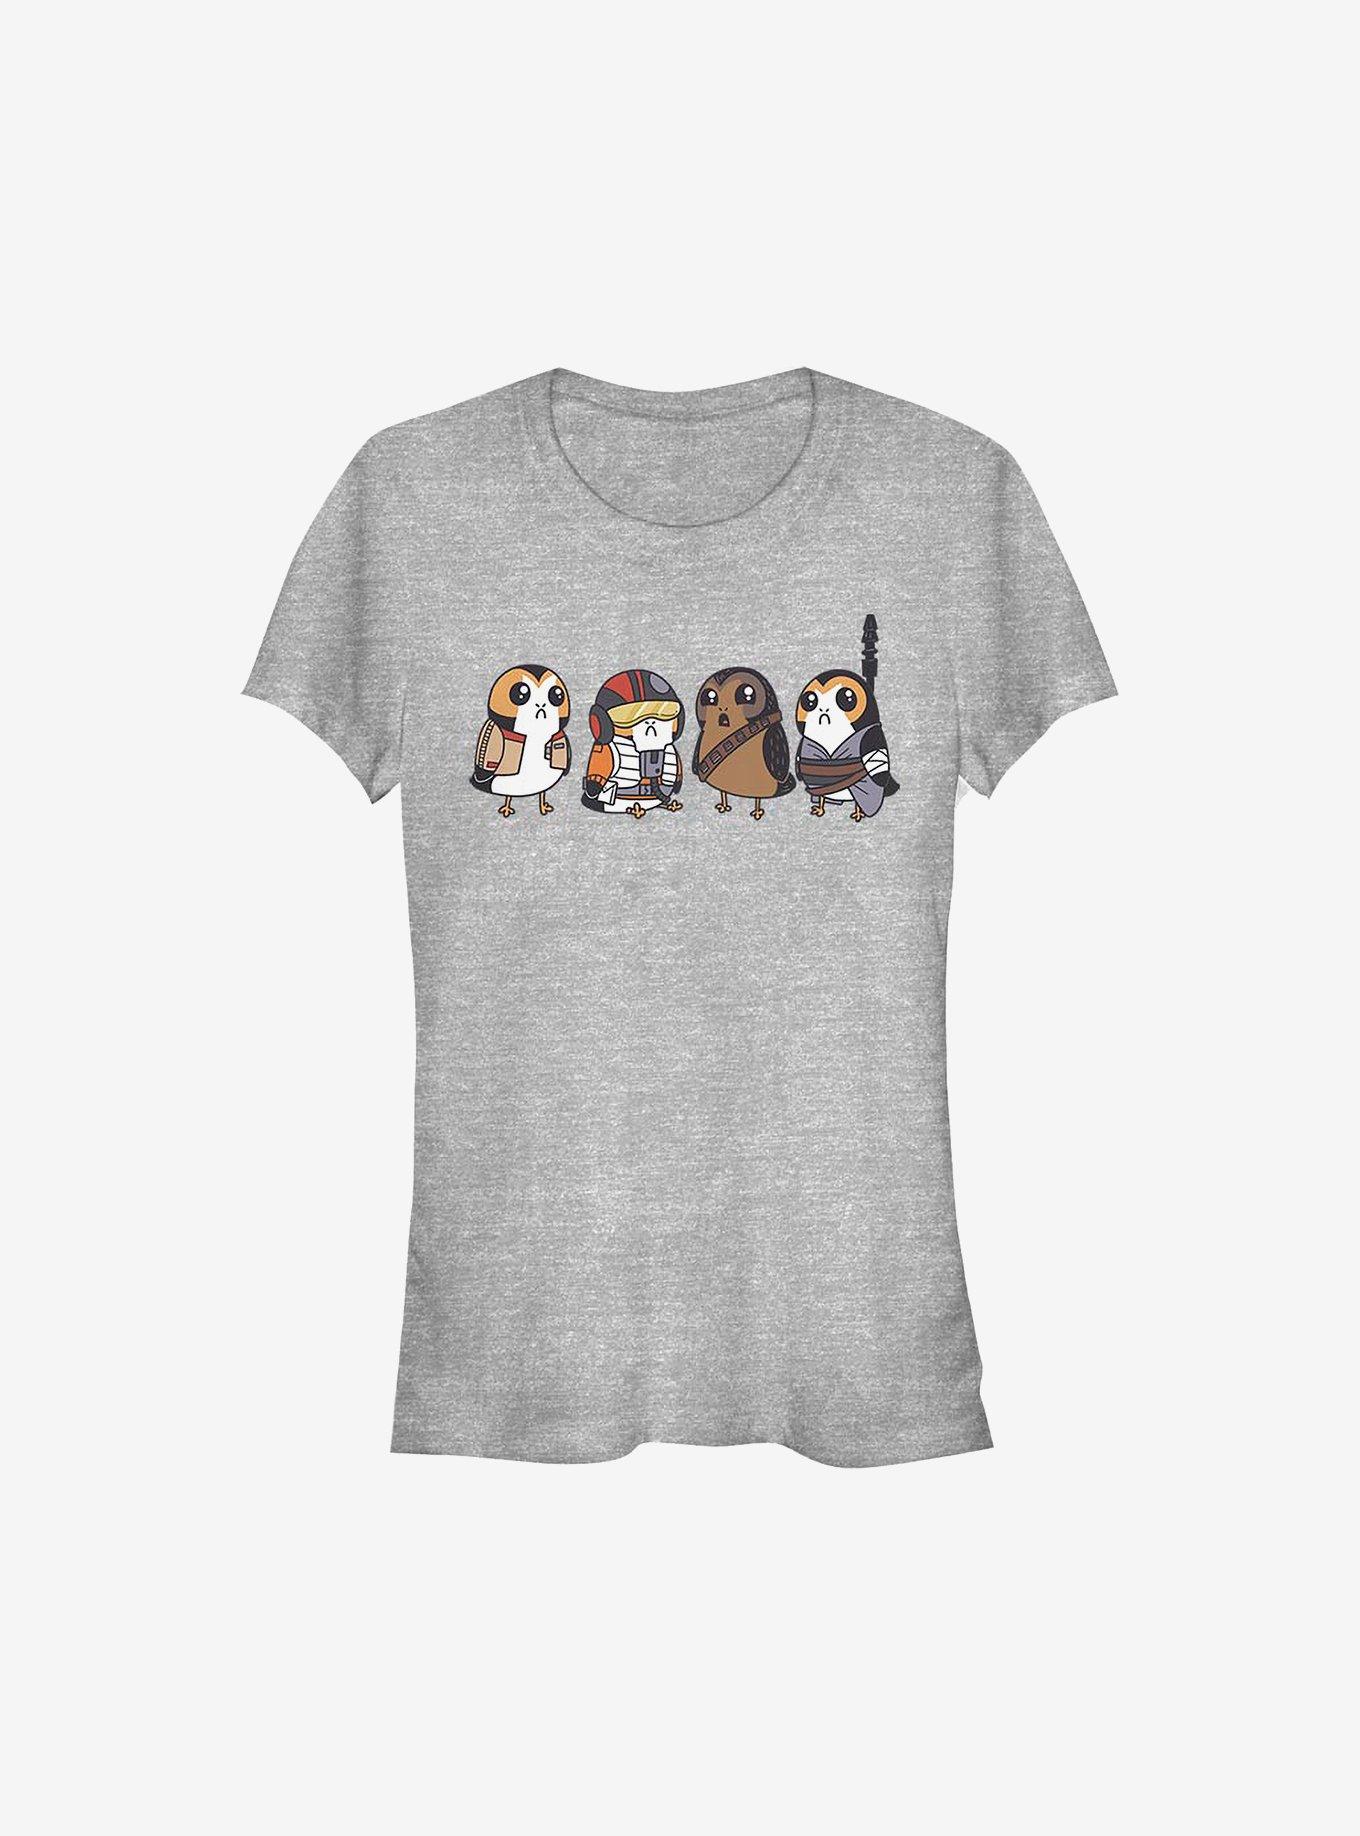 Star Wars: The Last Jedi Porgs As Characters Girls T-Shirt